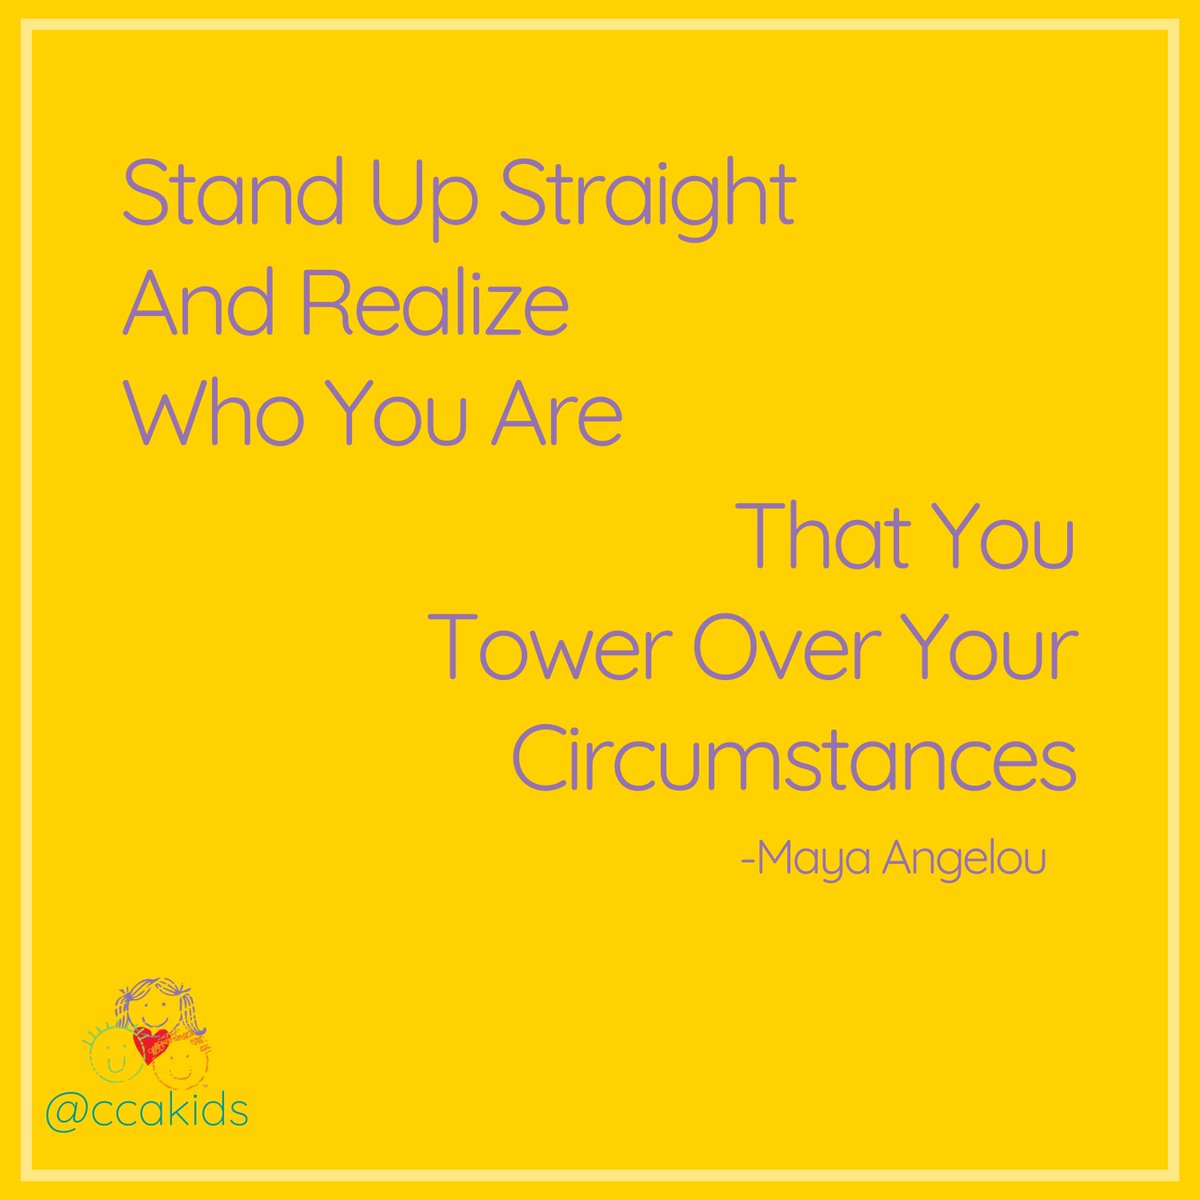 #Quote by #MayaAngelou
-—⁣
⁣
🖥️ ccakids.org⁣
💛 𝐅𝐚𝐜𝐞𝐛𝐨𝐨𝐤: / ccakids⁣
💛 𝐈𝐧𝐬𝐭𝐚𝐠𝐫𝐚𝐦: @ccakids⁣
📧 contactcca@ccakid.com⁣

DONATE AT:⁣
⚪ ccakids.org⁣
⚪ 𝐏𝐚𝐲𝐏𝐚𝐥: donate@ccakids.com⁣
⚪ 𝐙𝐞𝐥𝐥𝐞: donate@ccakids.com⁣